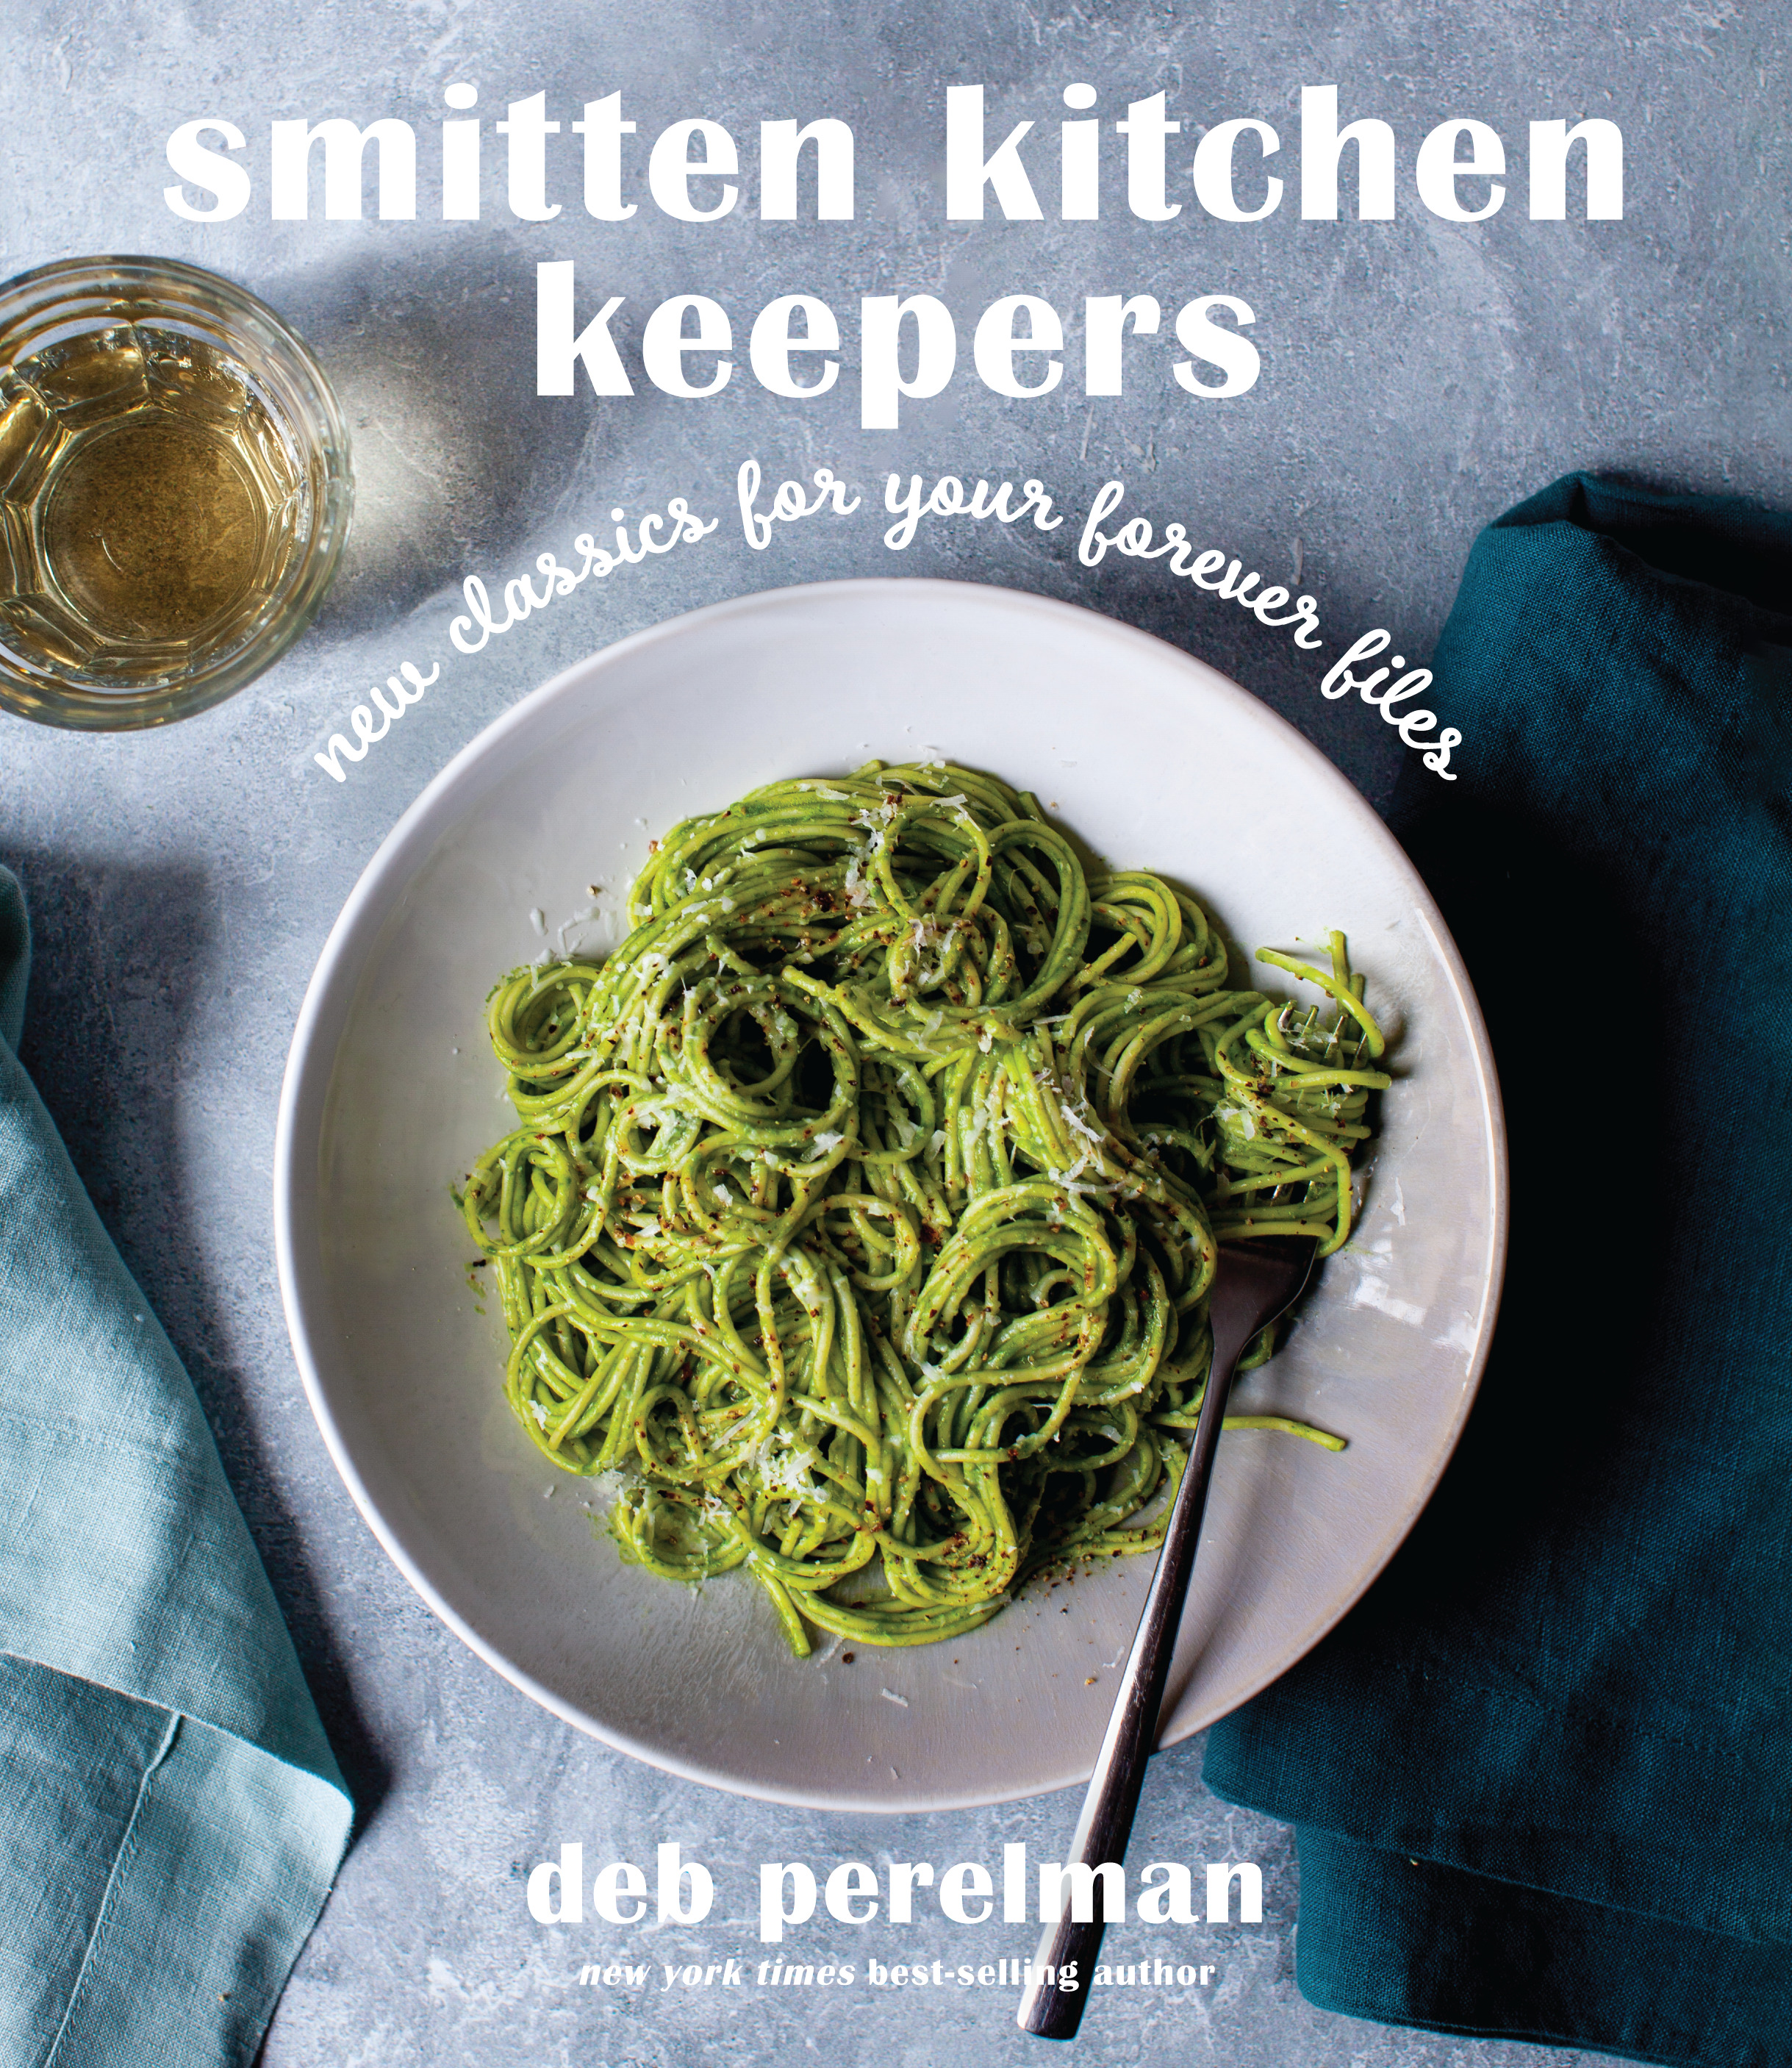 In-Person Event with Deb Perelman/Smitten Kitchen Keepers